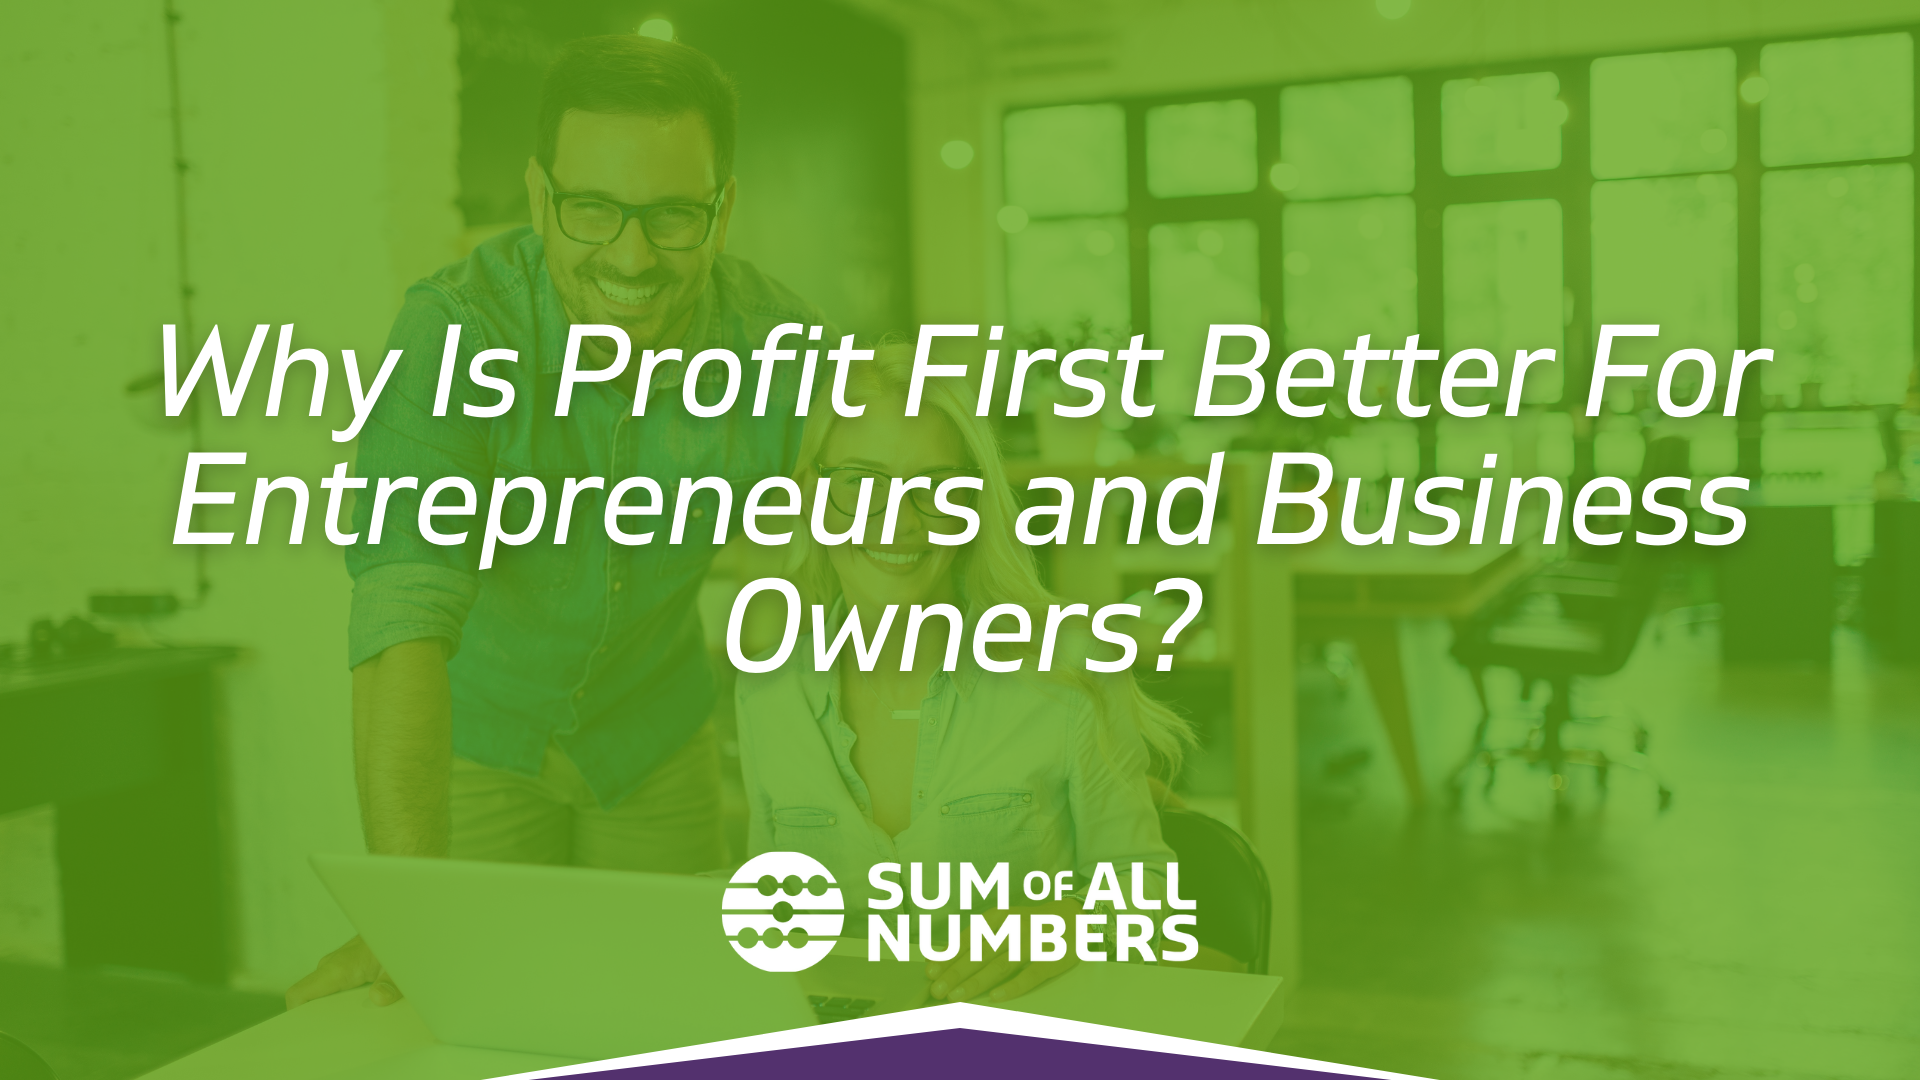 Our featured image for the blog post “Why Is Profit First Better For Entrepreneurs?” | numbers.lojoweb.com